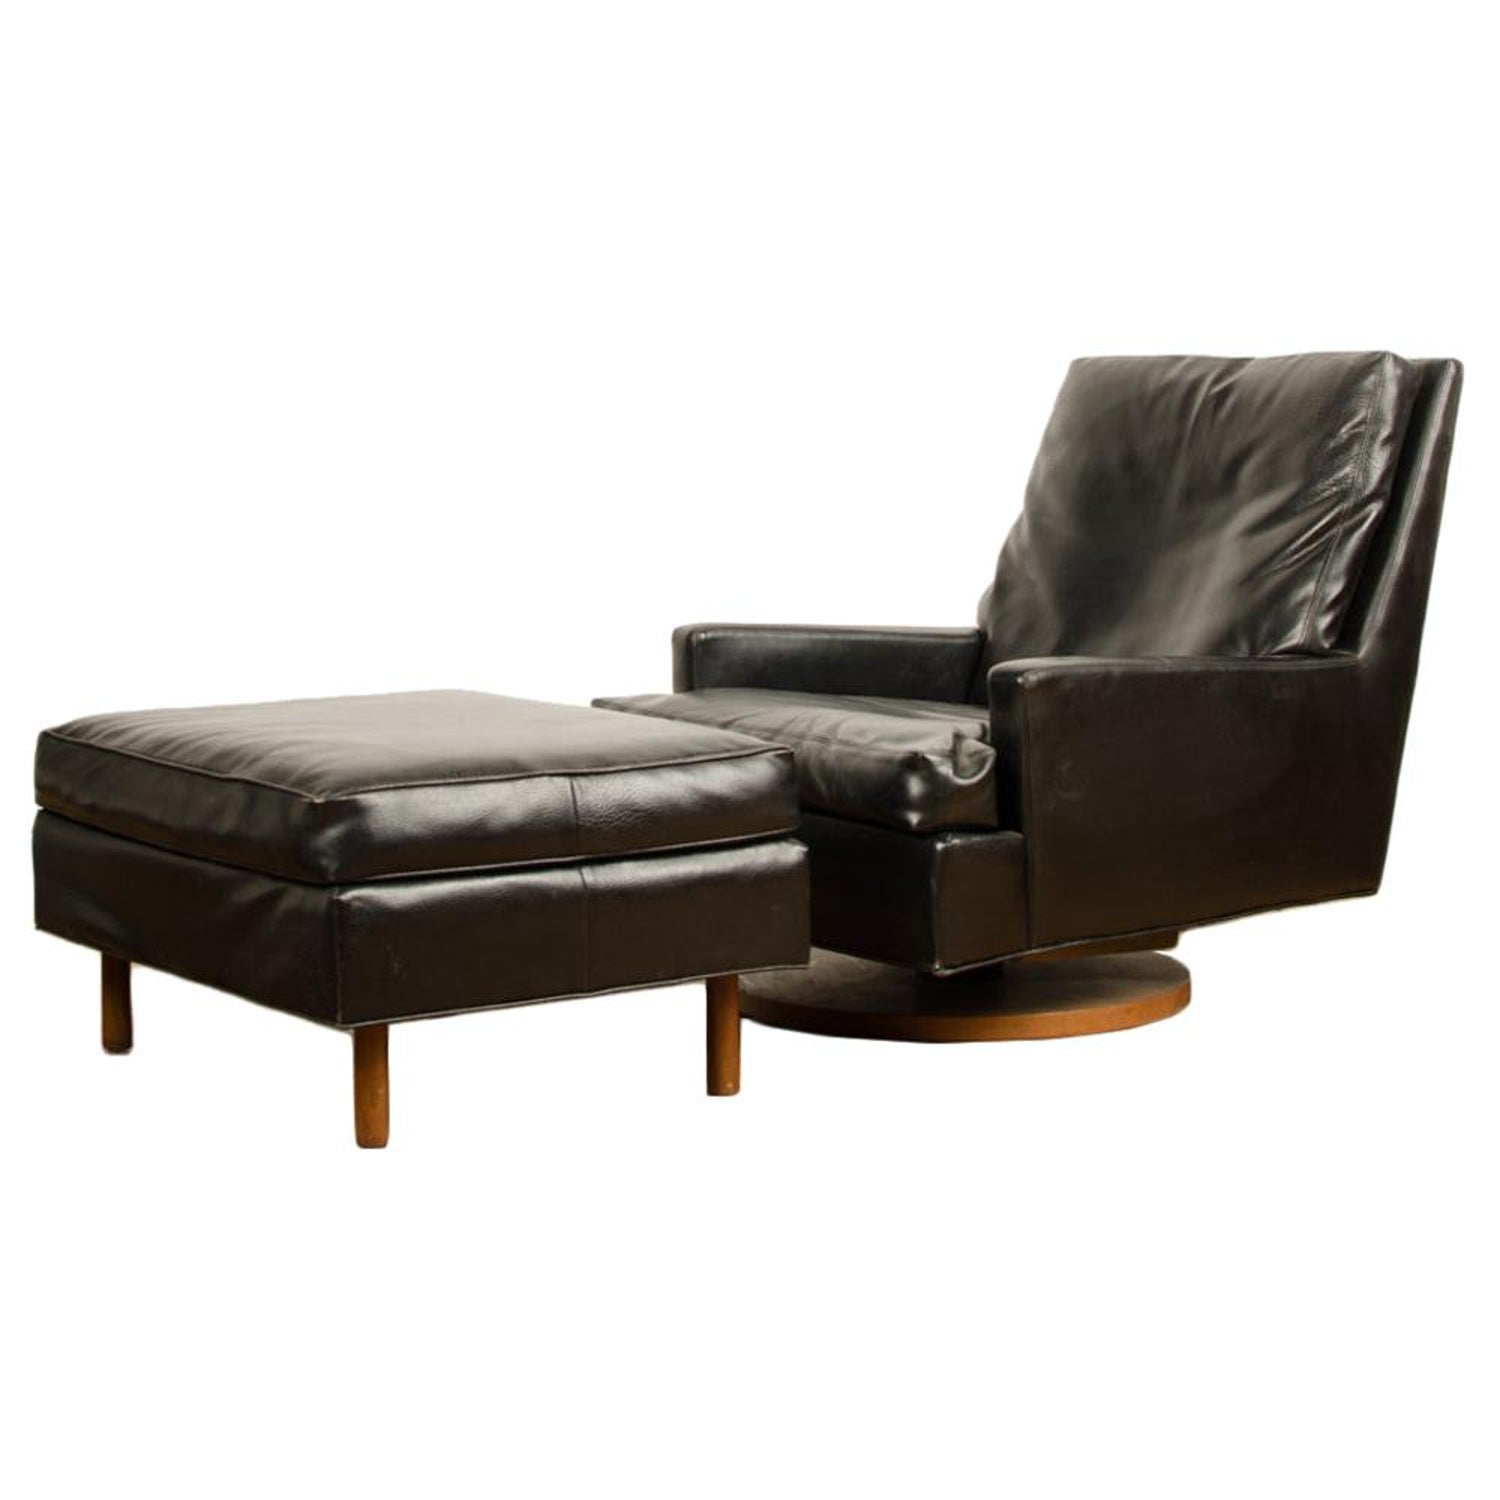 Black Leather Reclining Lounge Chair, Black Leather Lounge Chair With Ottoman